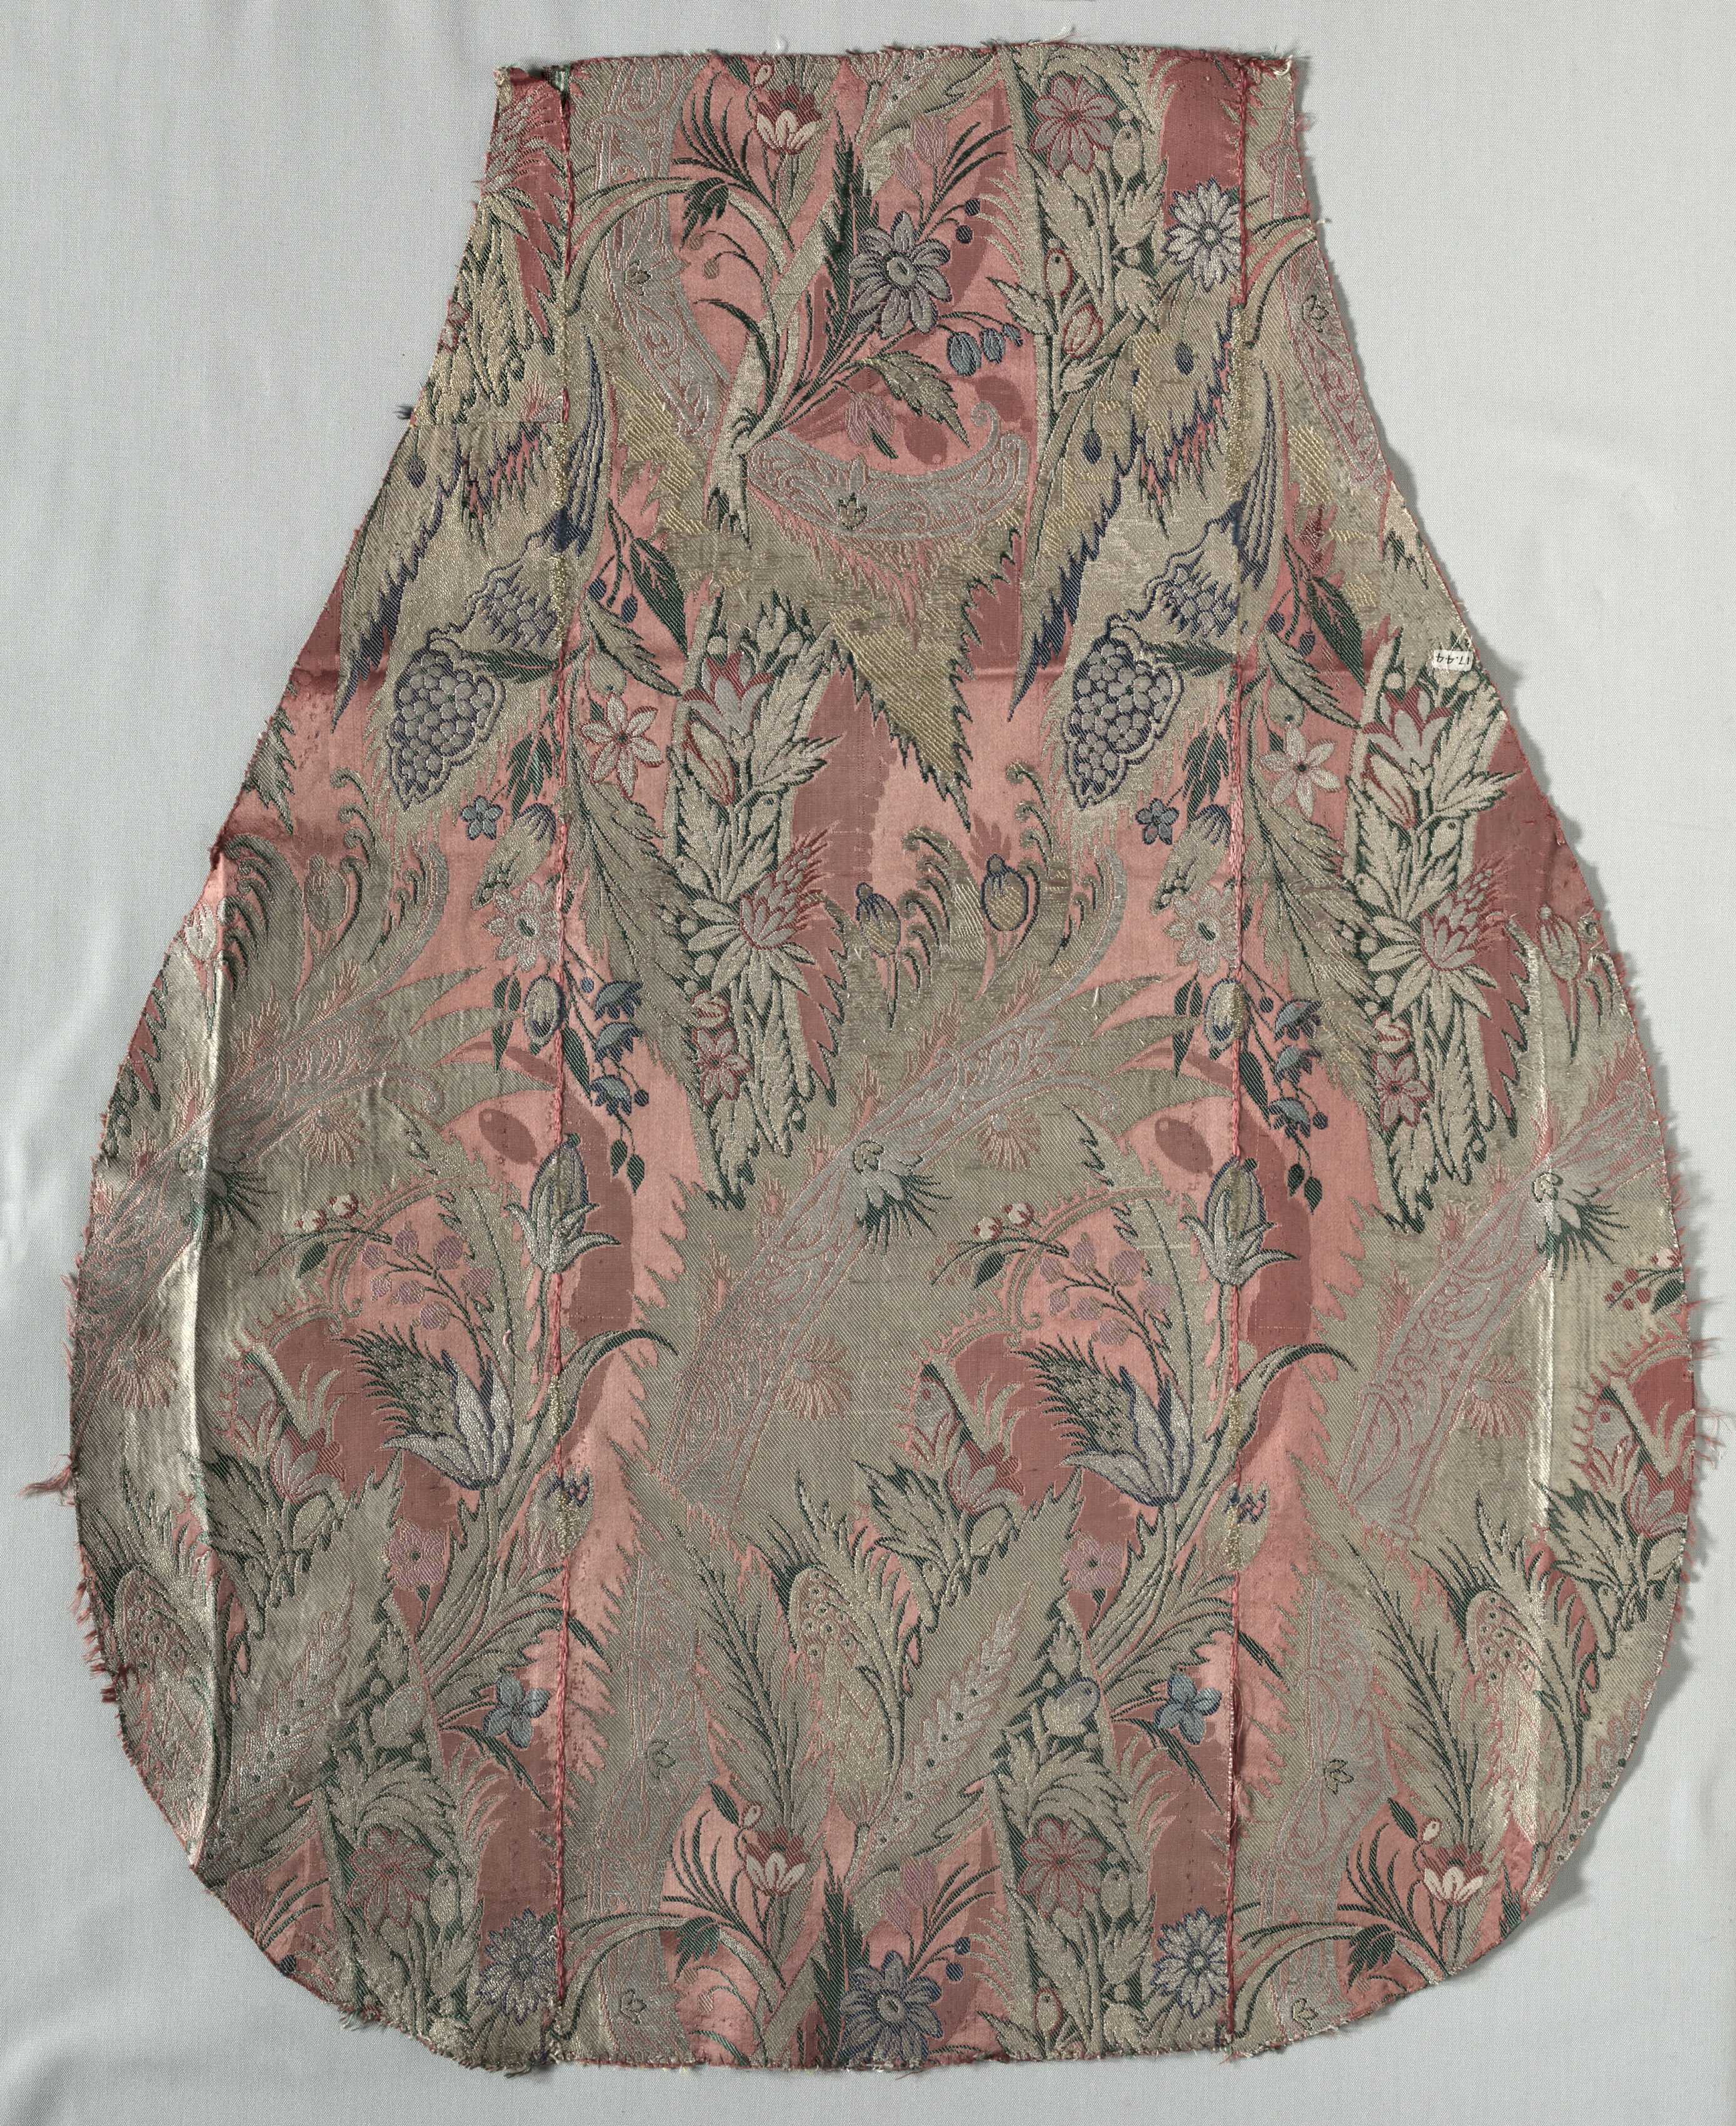 Half of a Chasuble